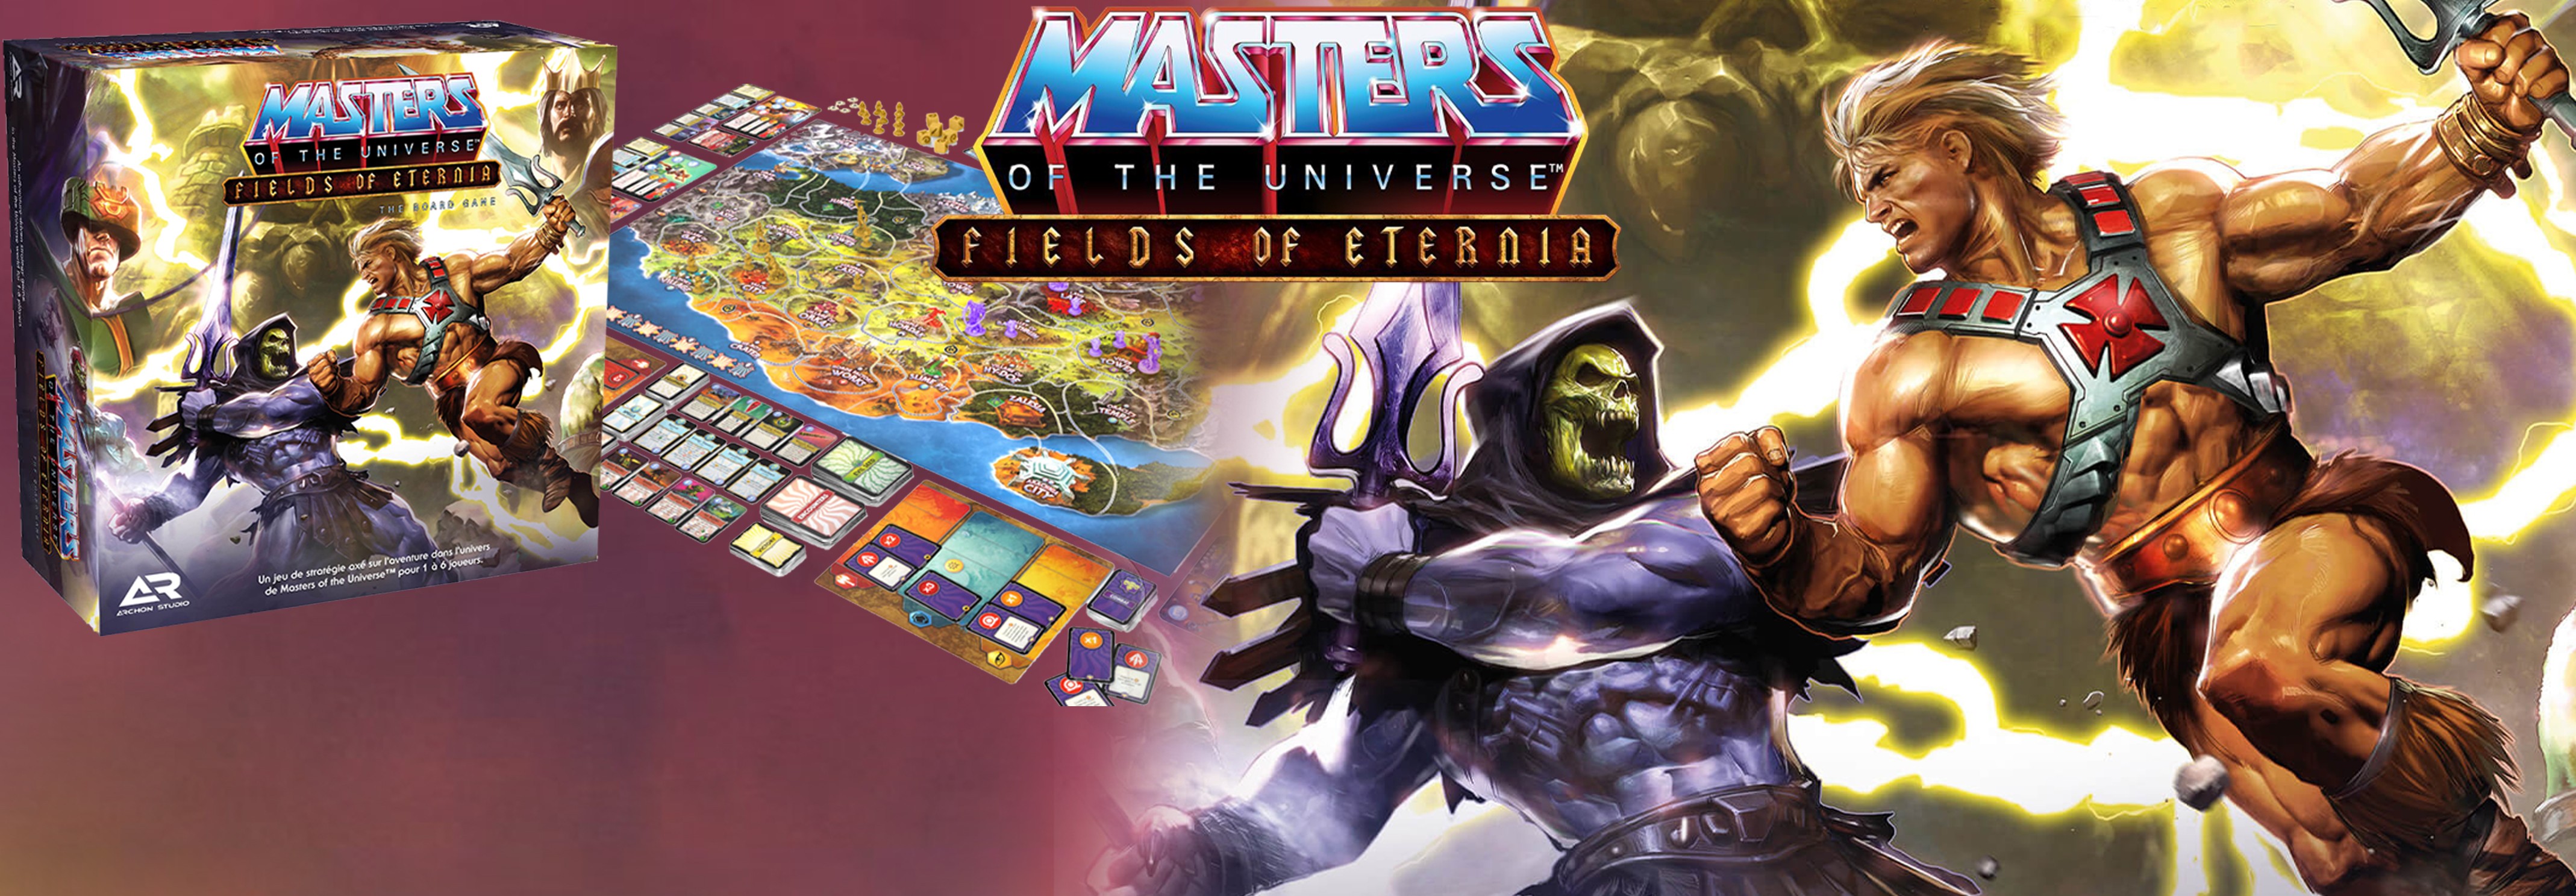 Masters of the Universe : Fields of Eternia